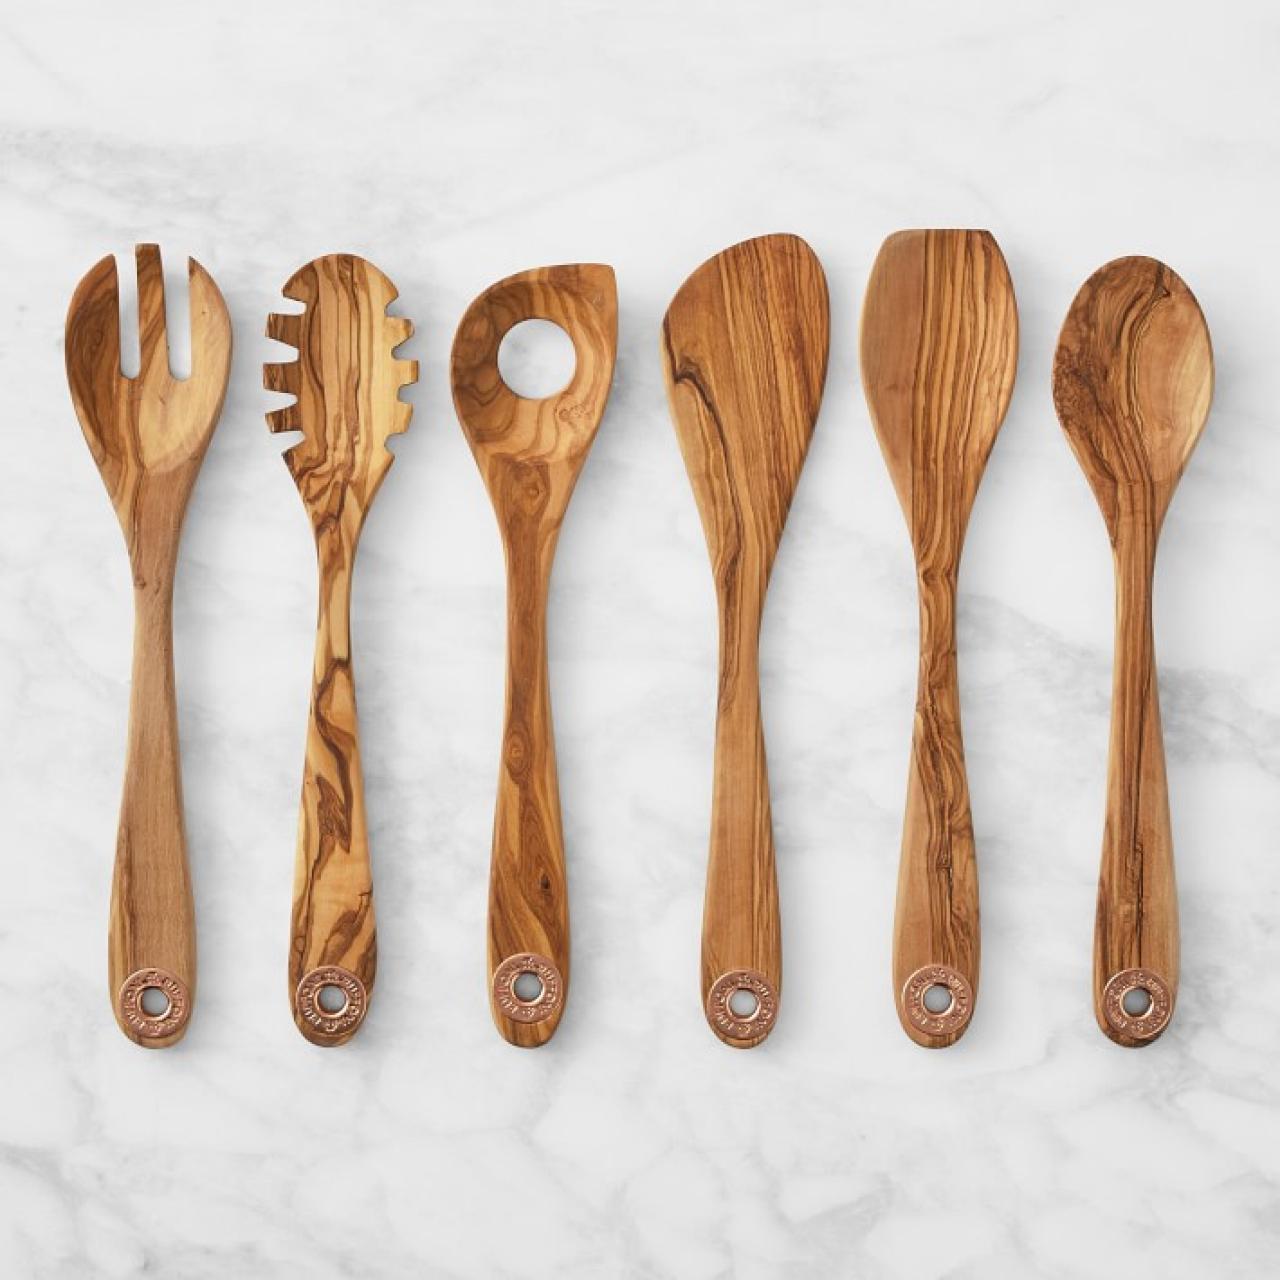 https://food.fnr.sndimg.com/content/dam/images/food/products/2021/7/15/rx_ruffoni-6-piece-olivewood-tool-set.jpeg.rend.hgtvcom.1280.1280.suffix/1626387065212.jpeg